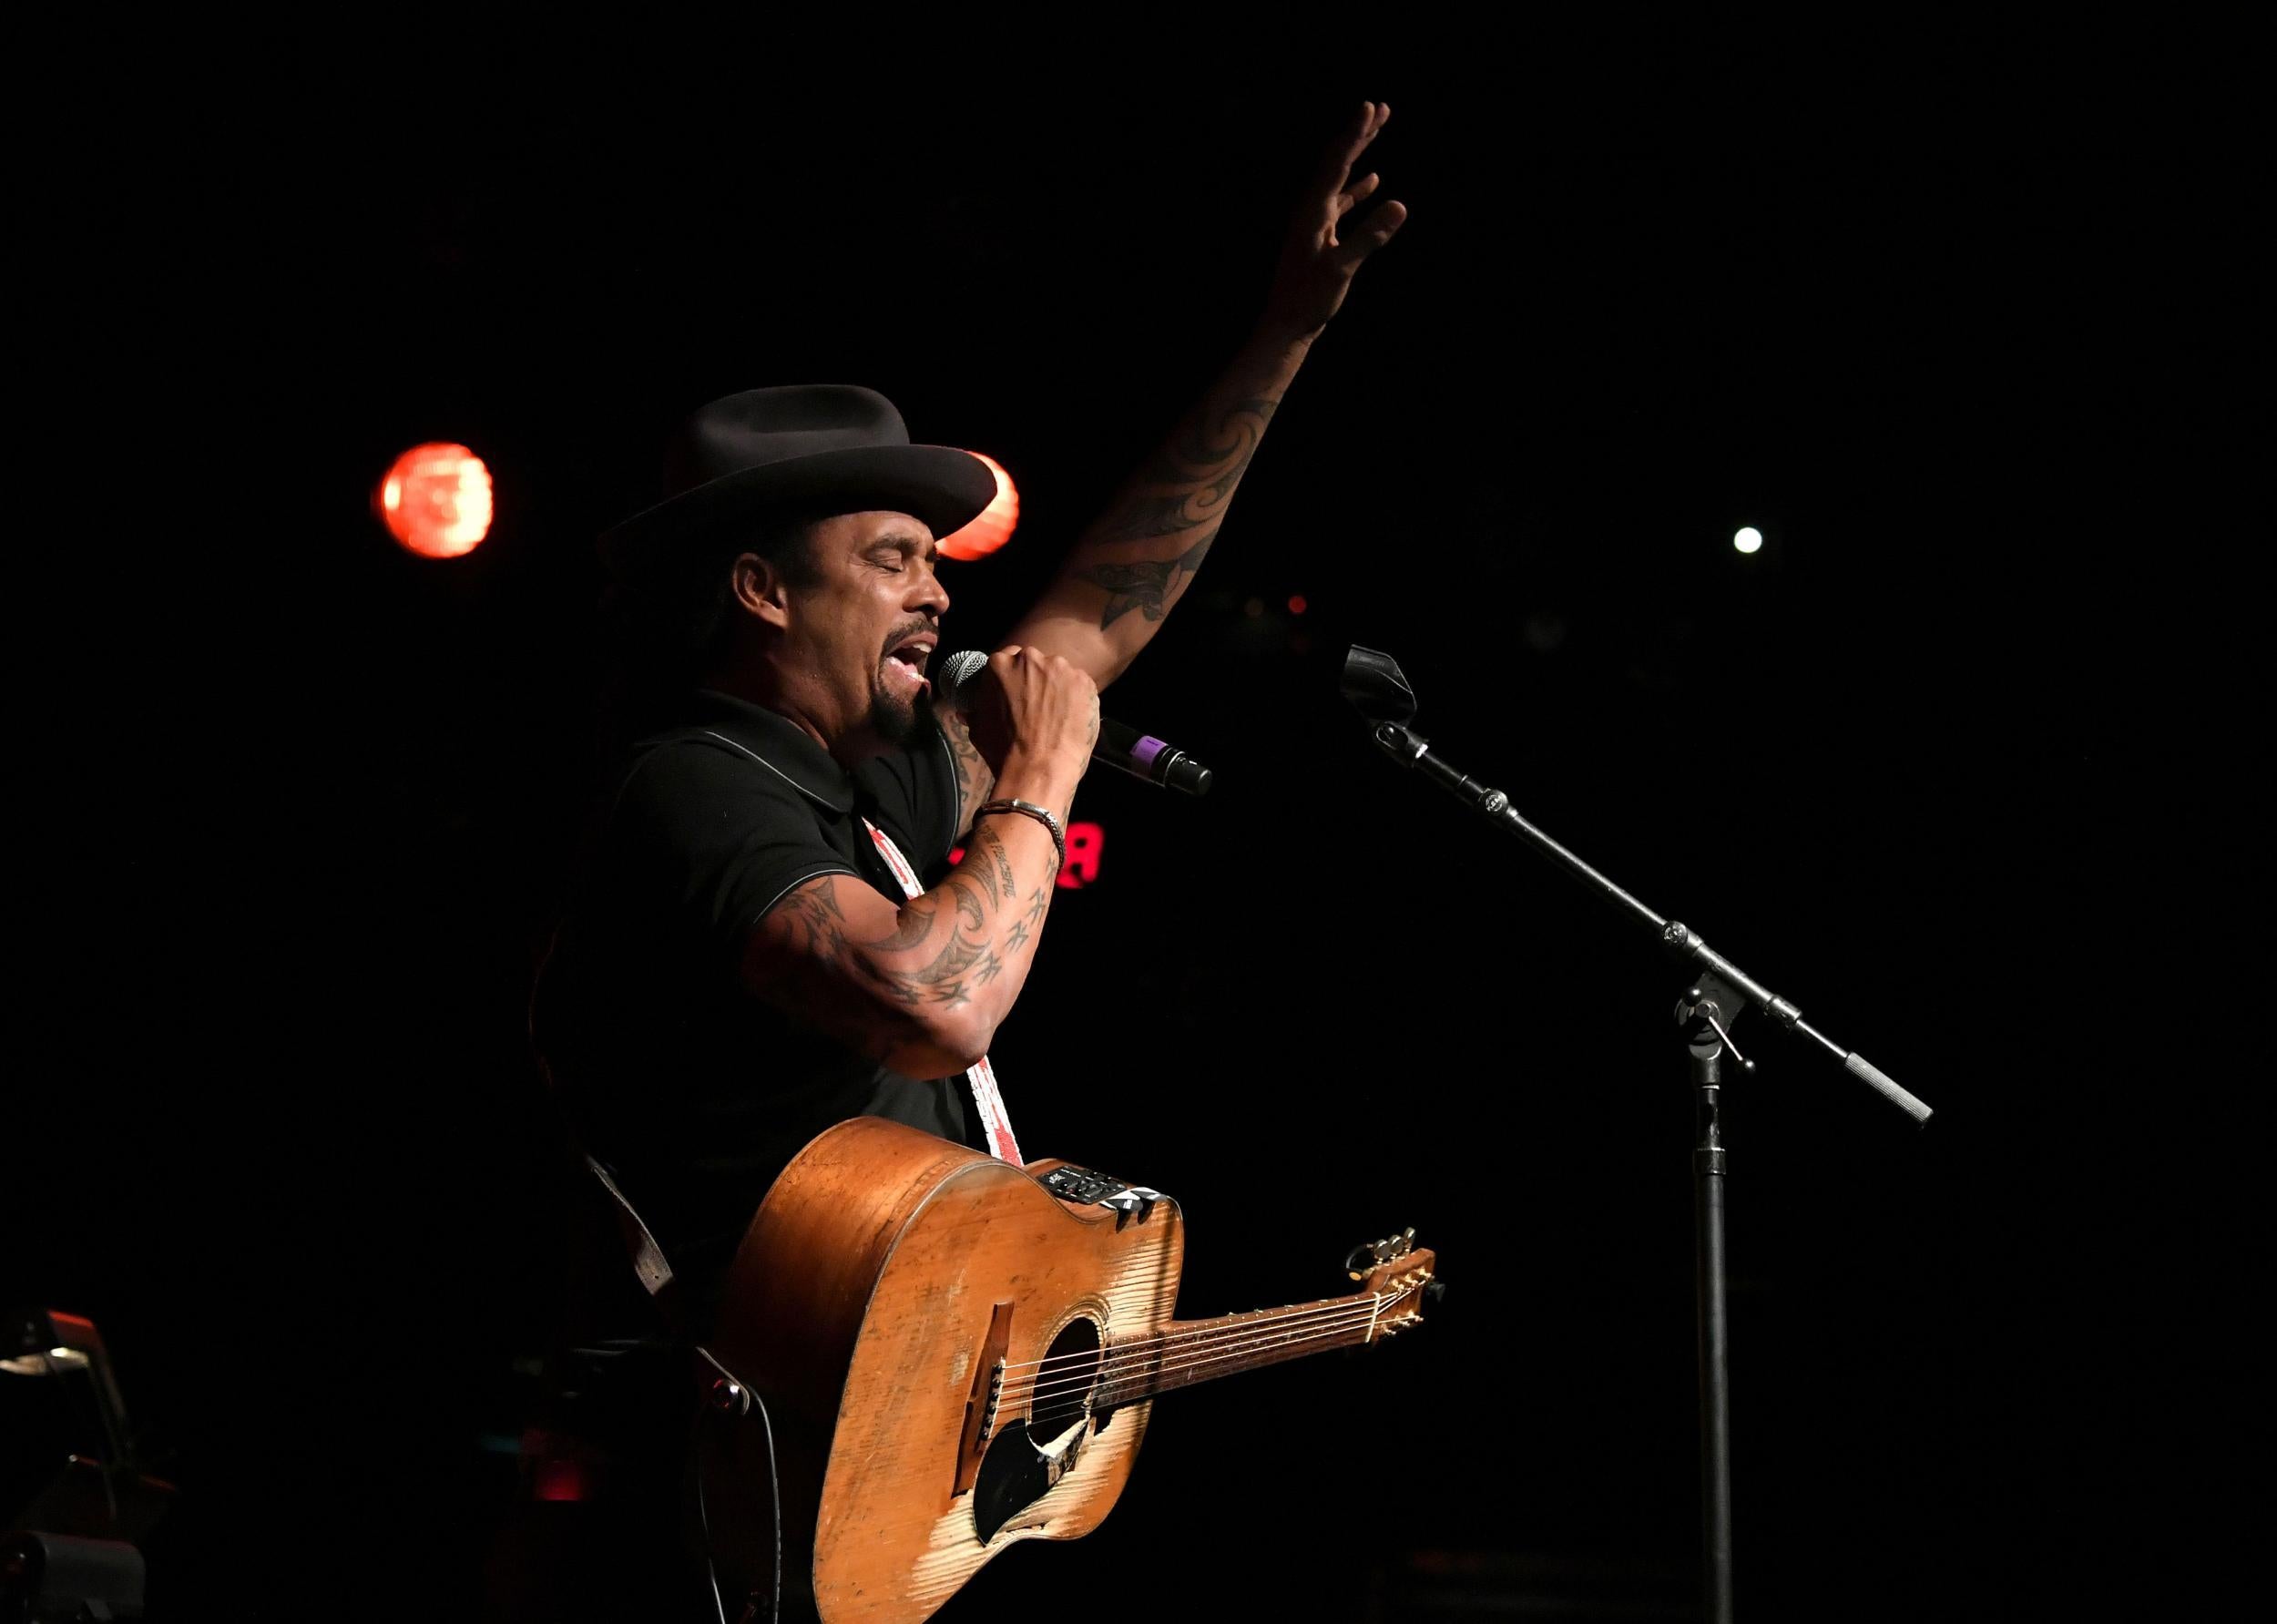 Franti is a veteran campaigner on social issues